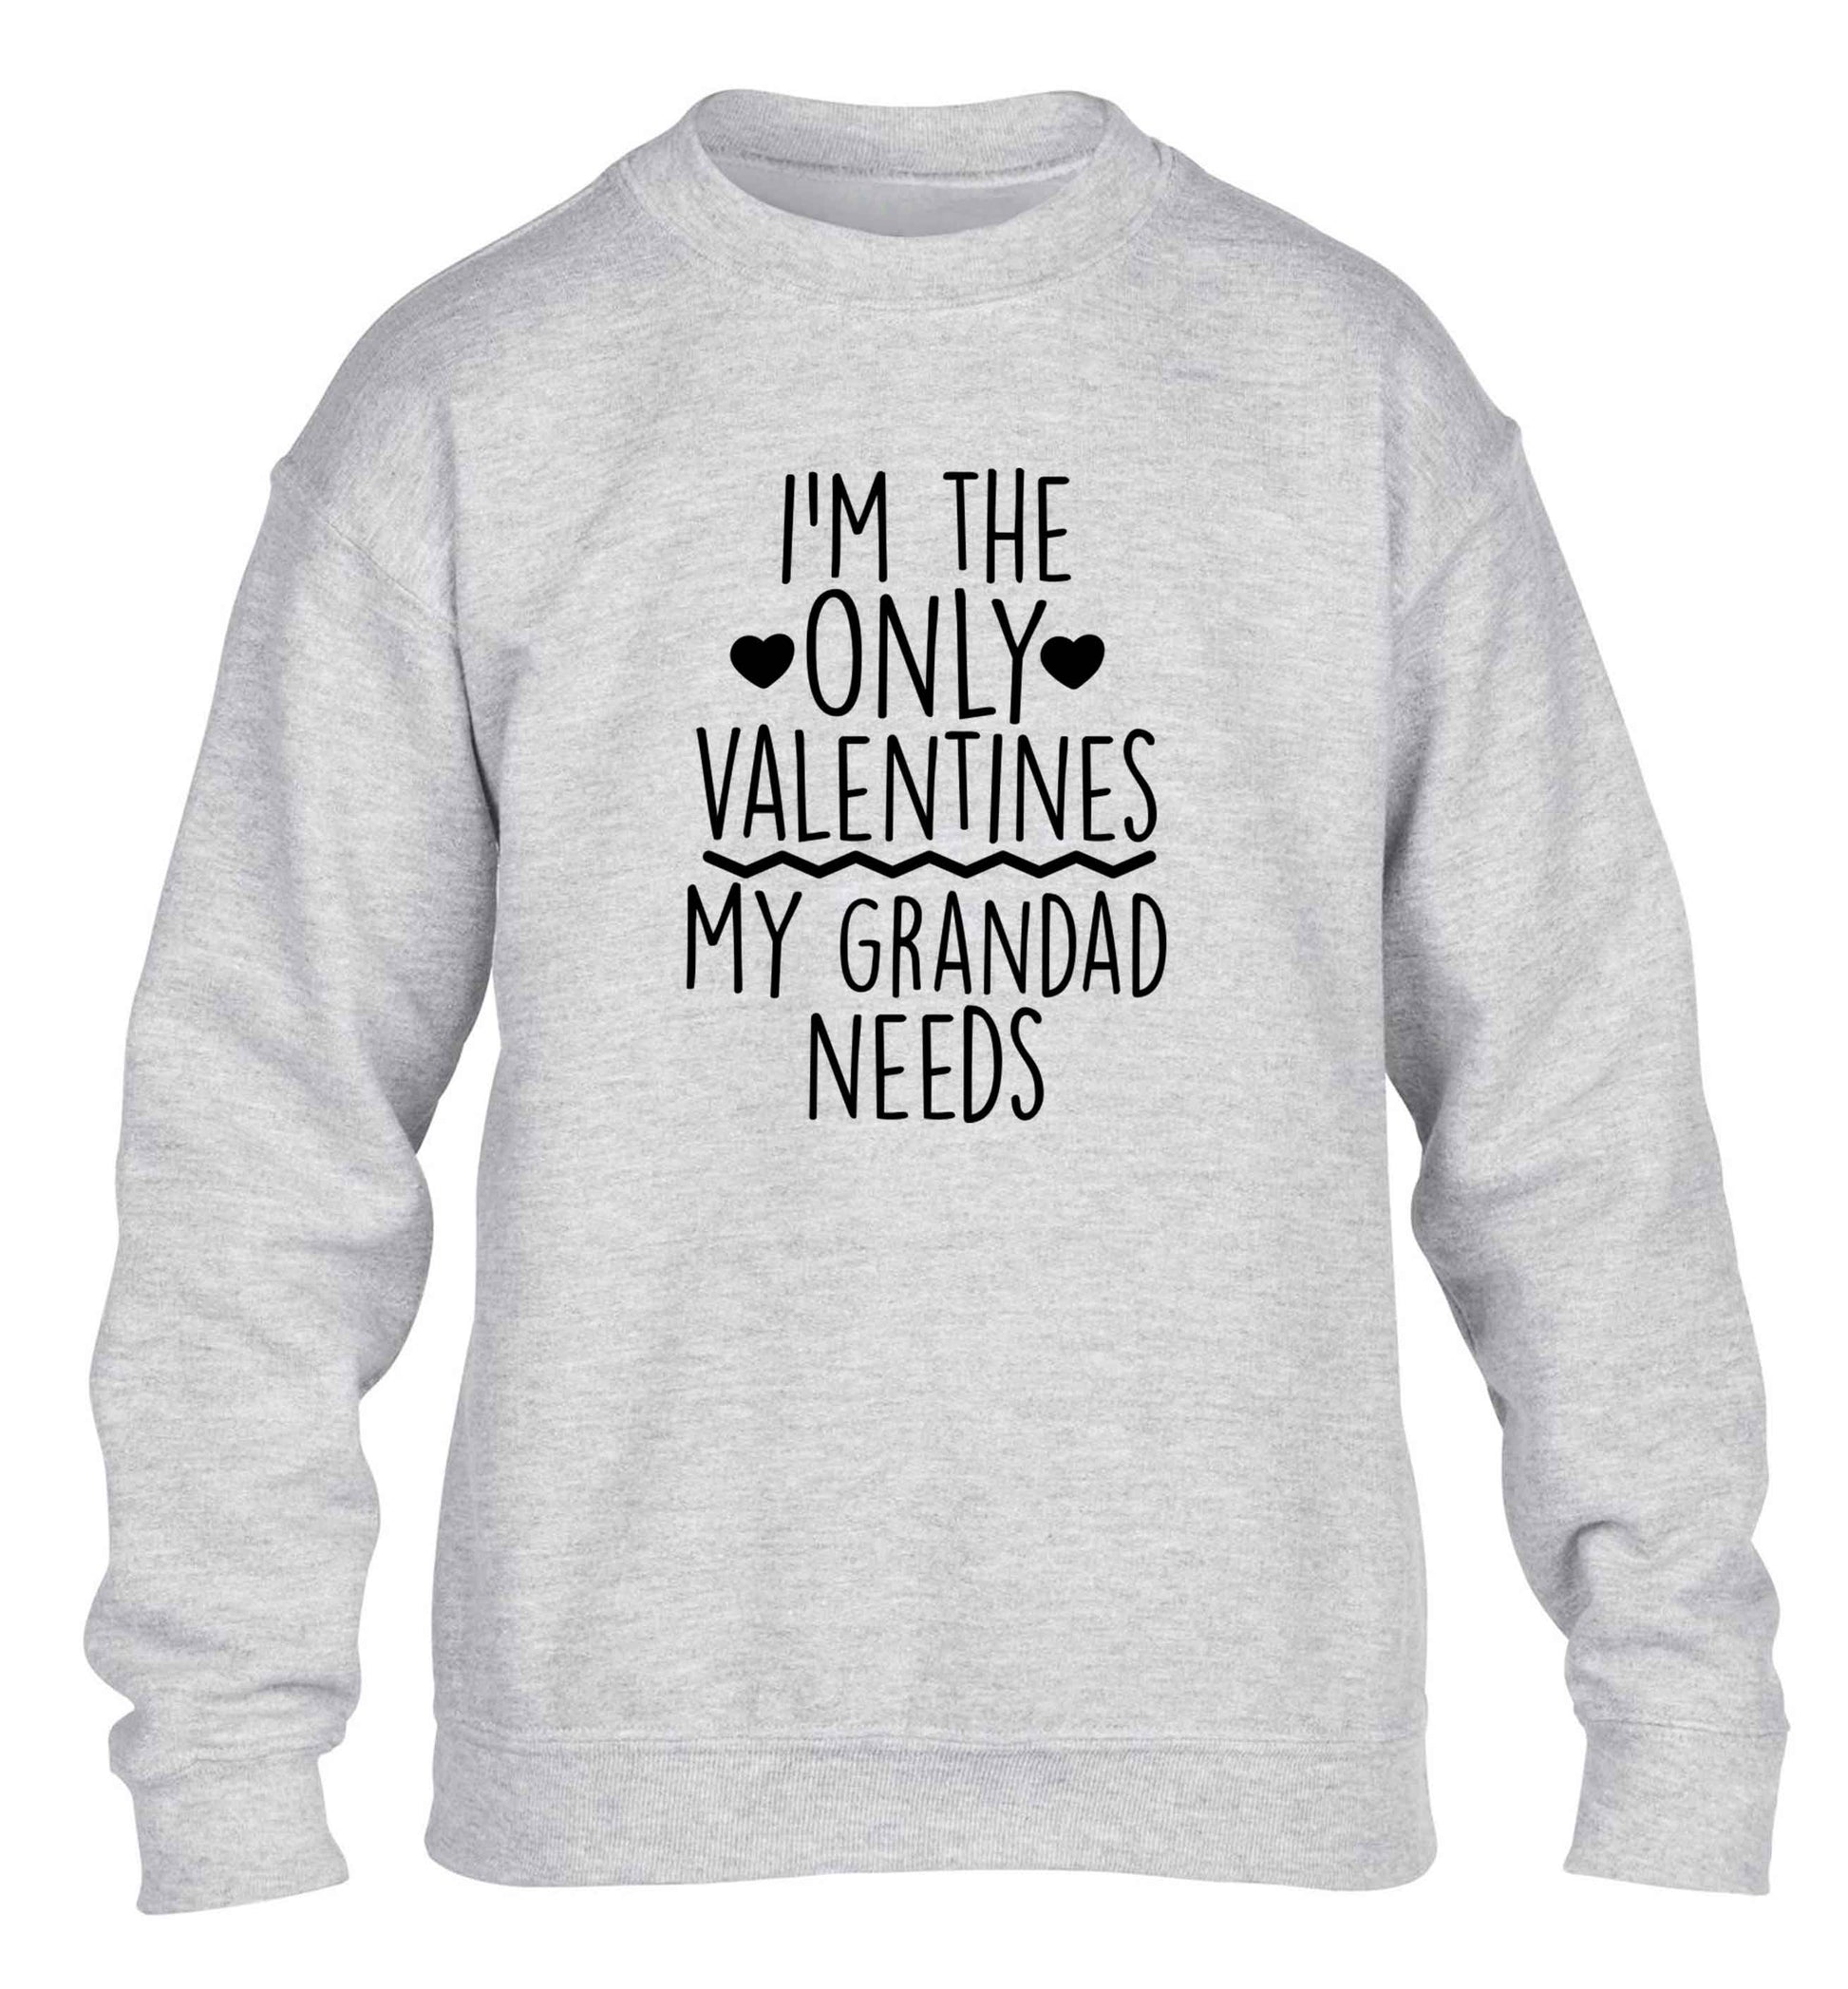 I'm the only valentines my grandad needs children's grey sweater 12-13 Years